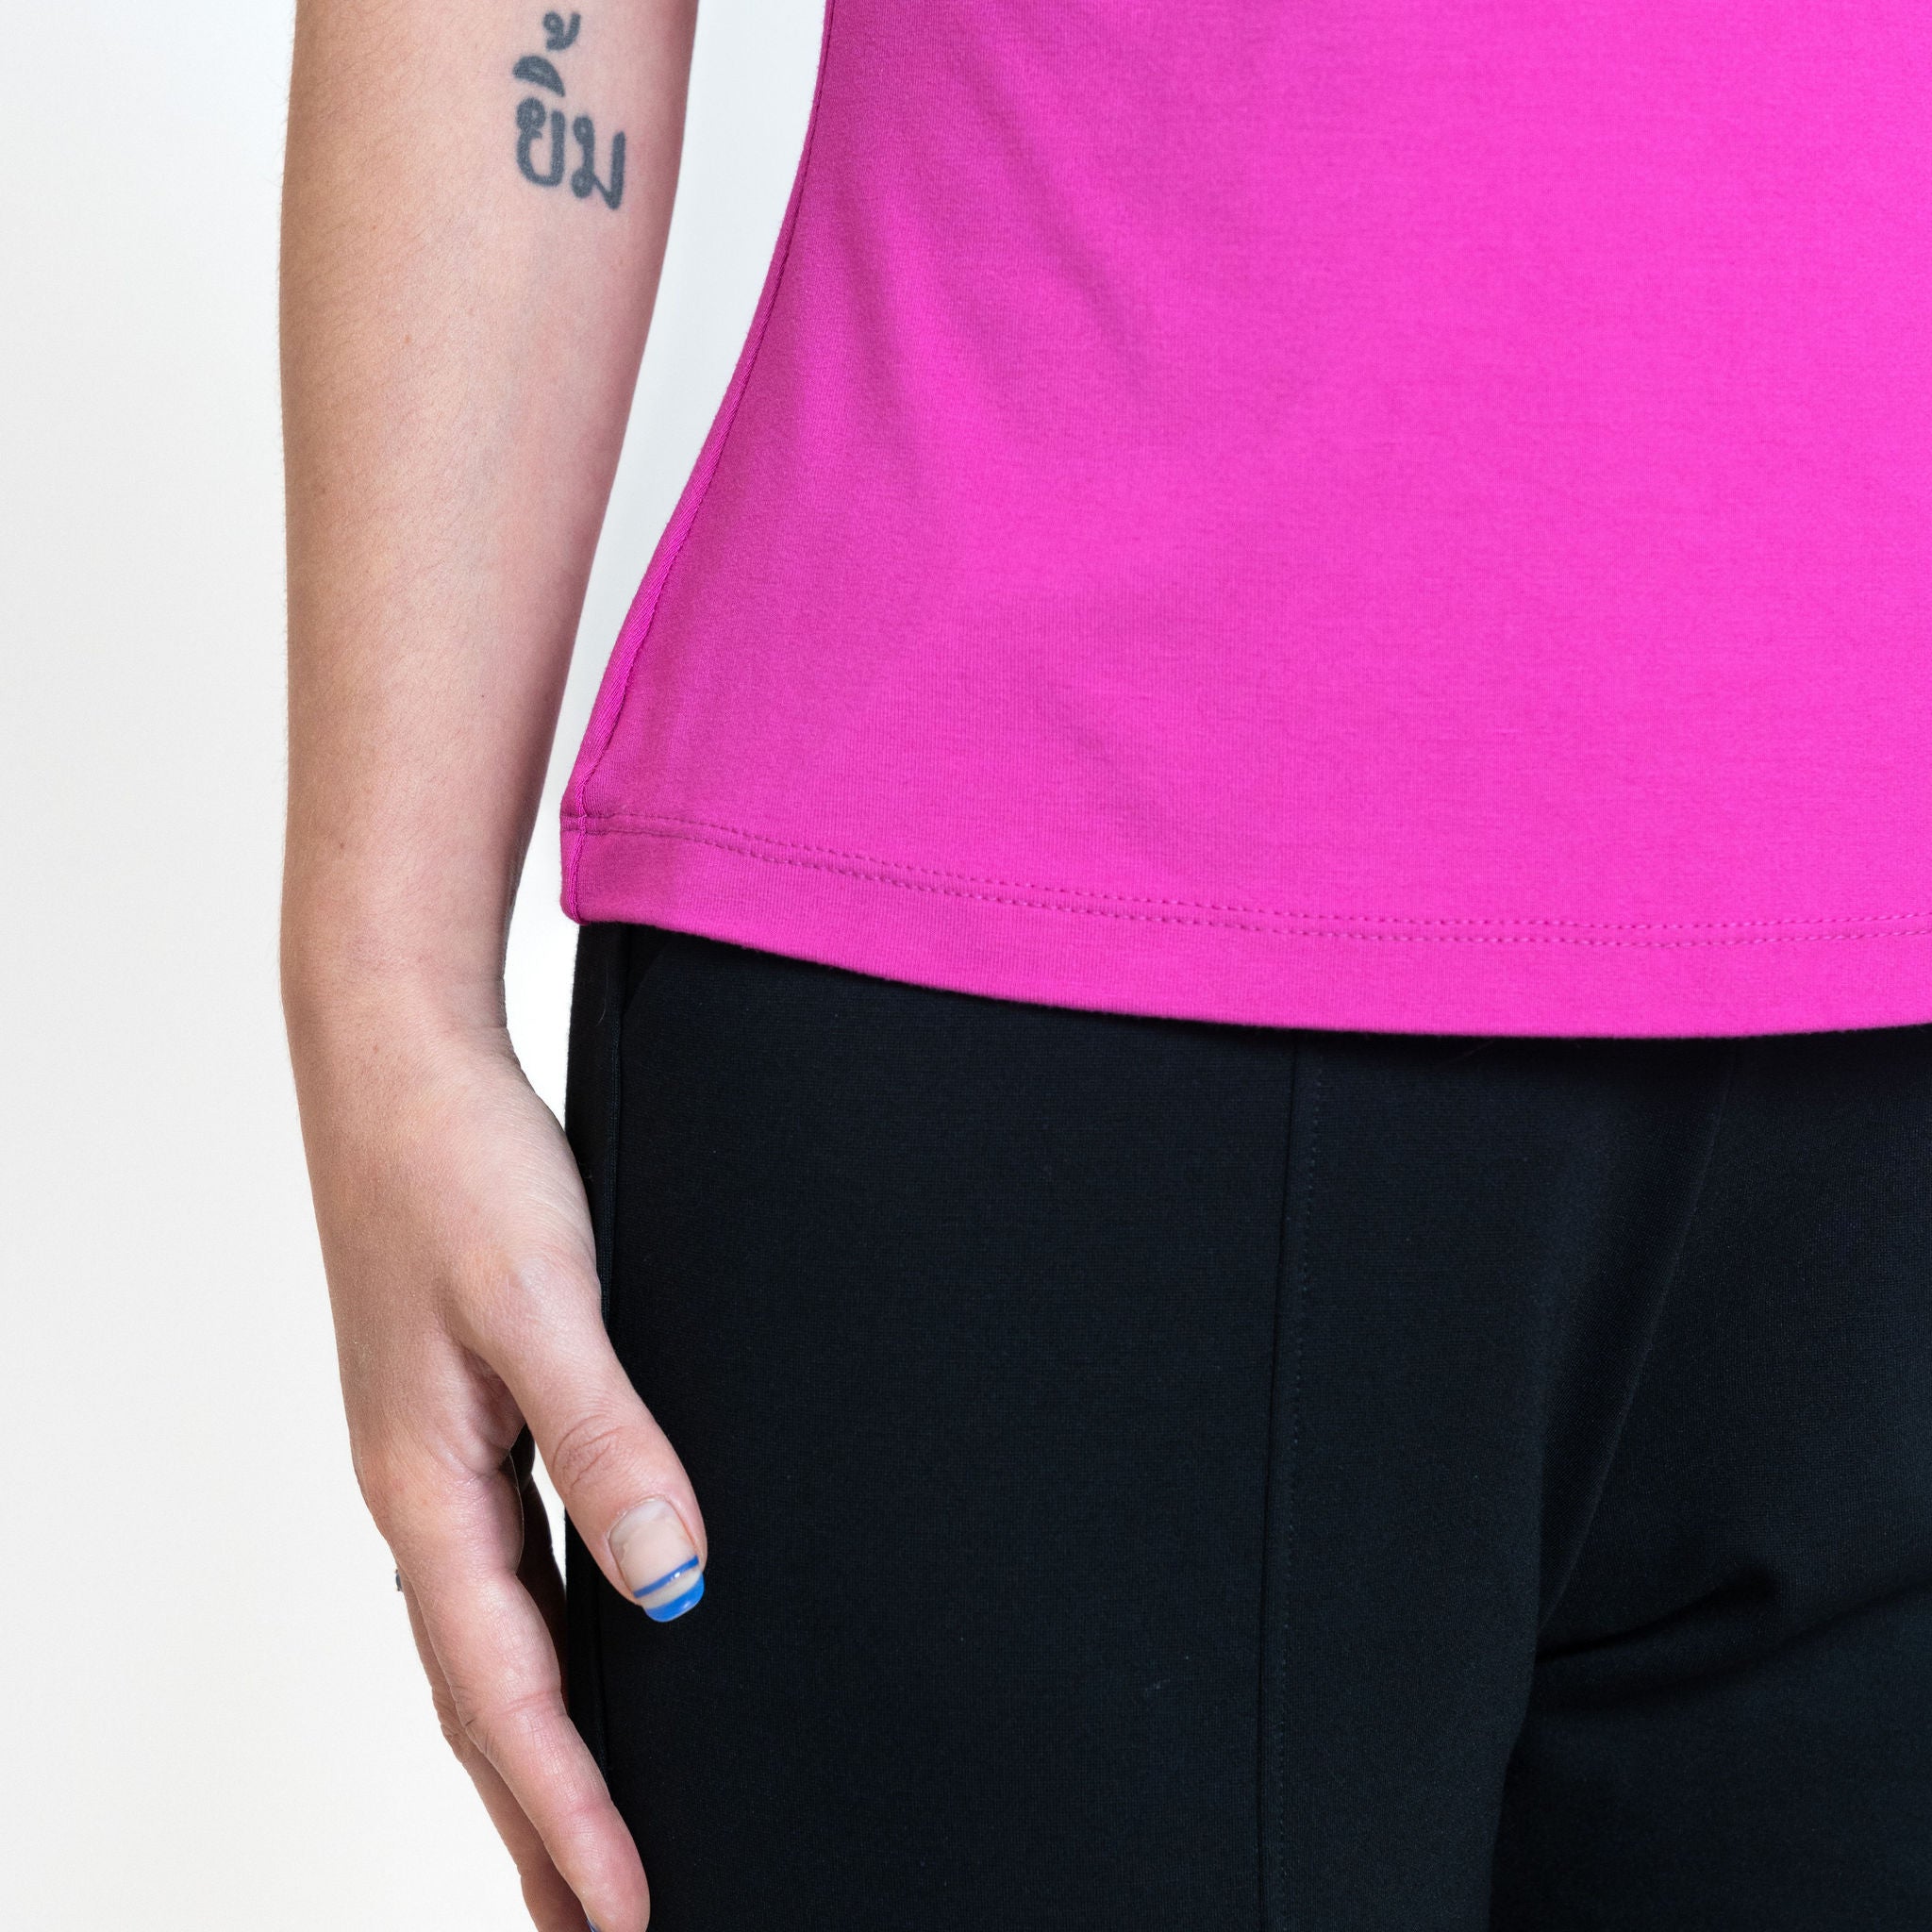 Woman wearing loose bright pink crew neck t-shirt with black tailored ankle length pants